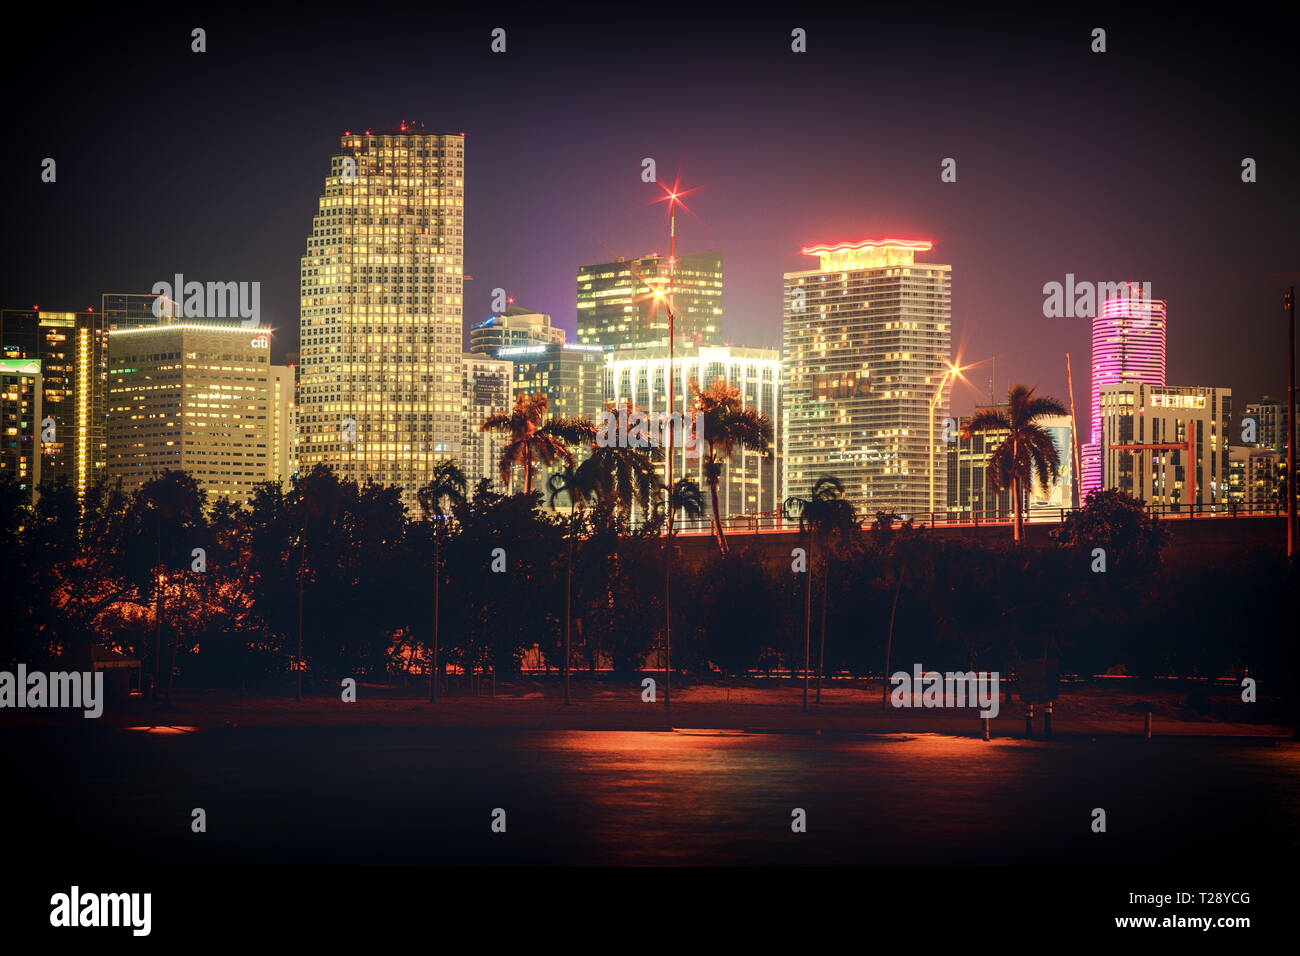 Night Scenery of Miami City Scape across the water. Neon lit skyscrpaers Stock Photo